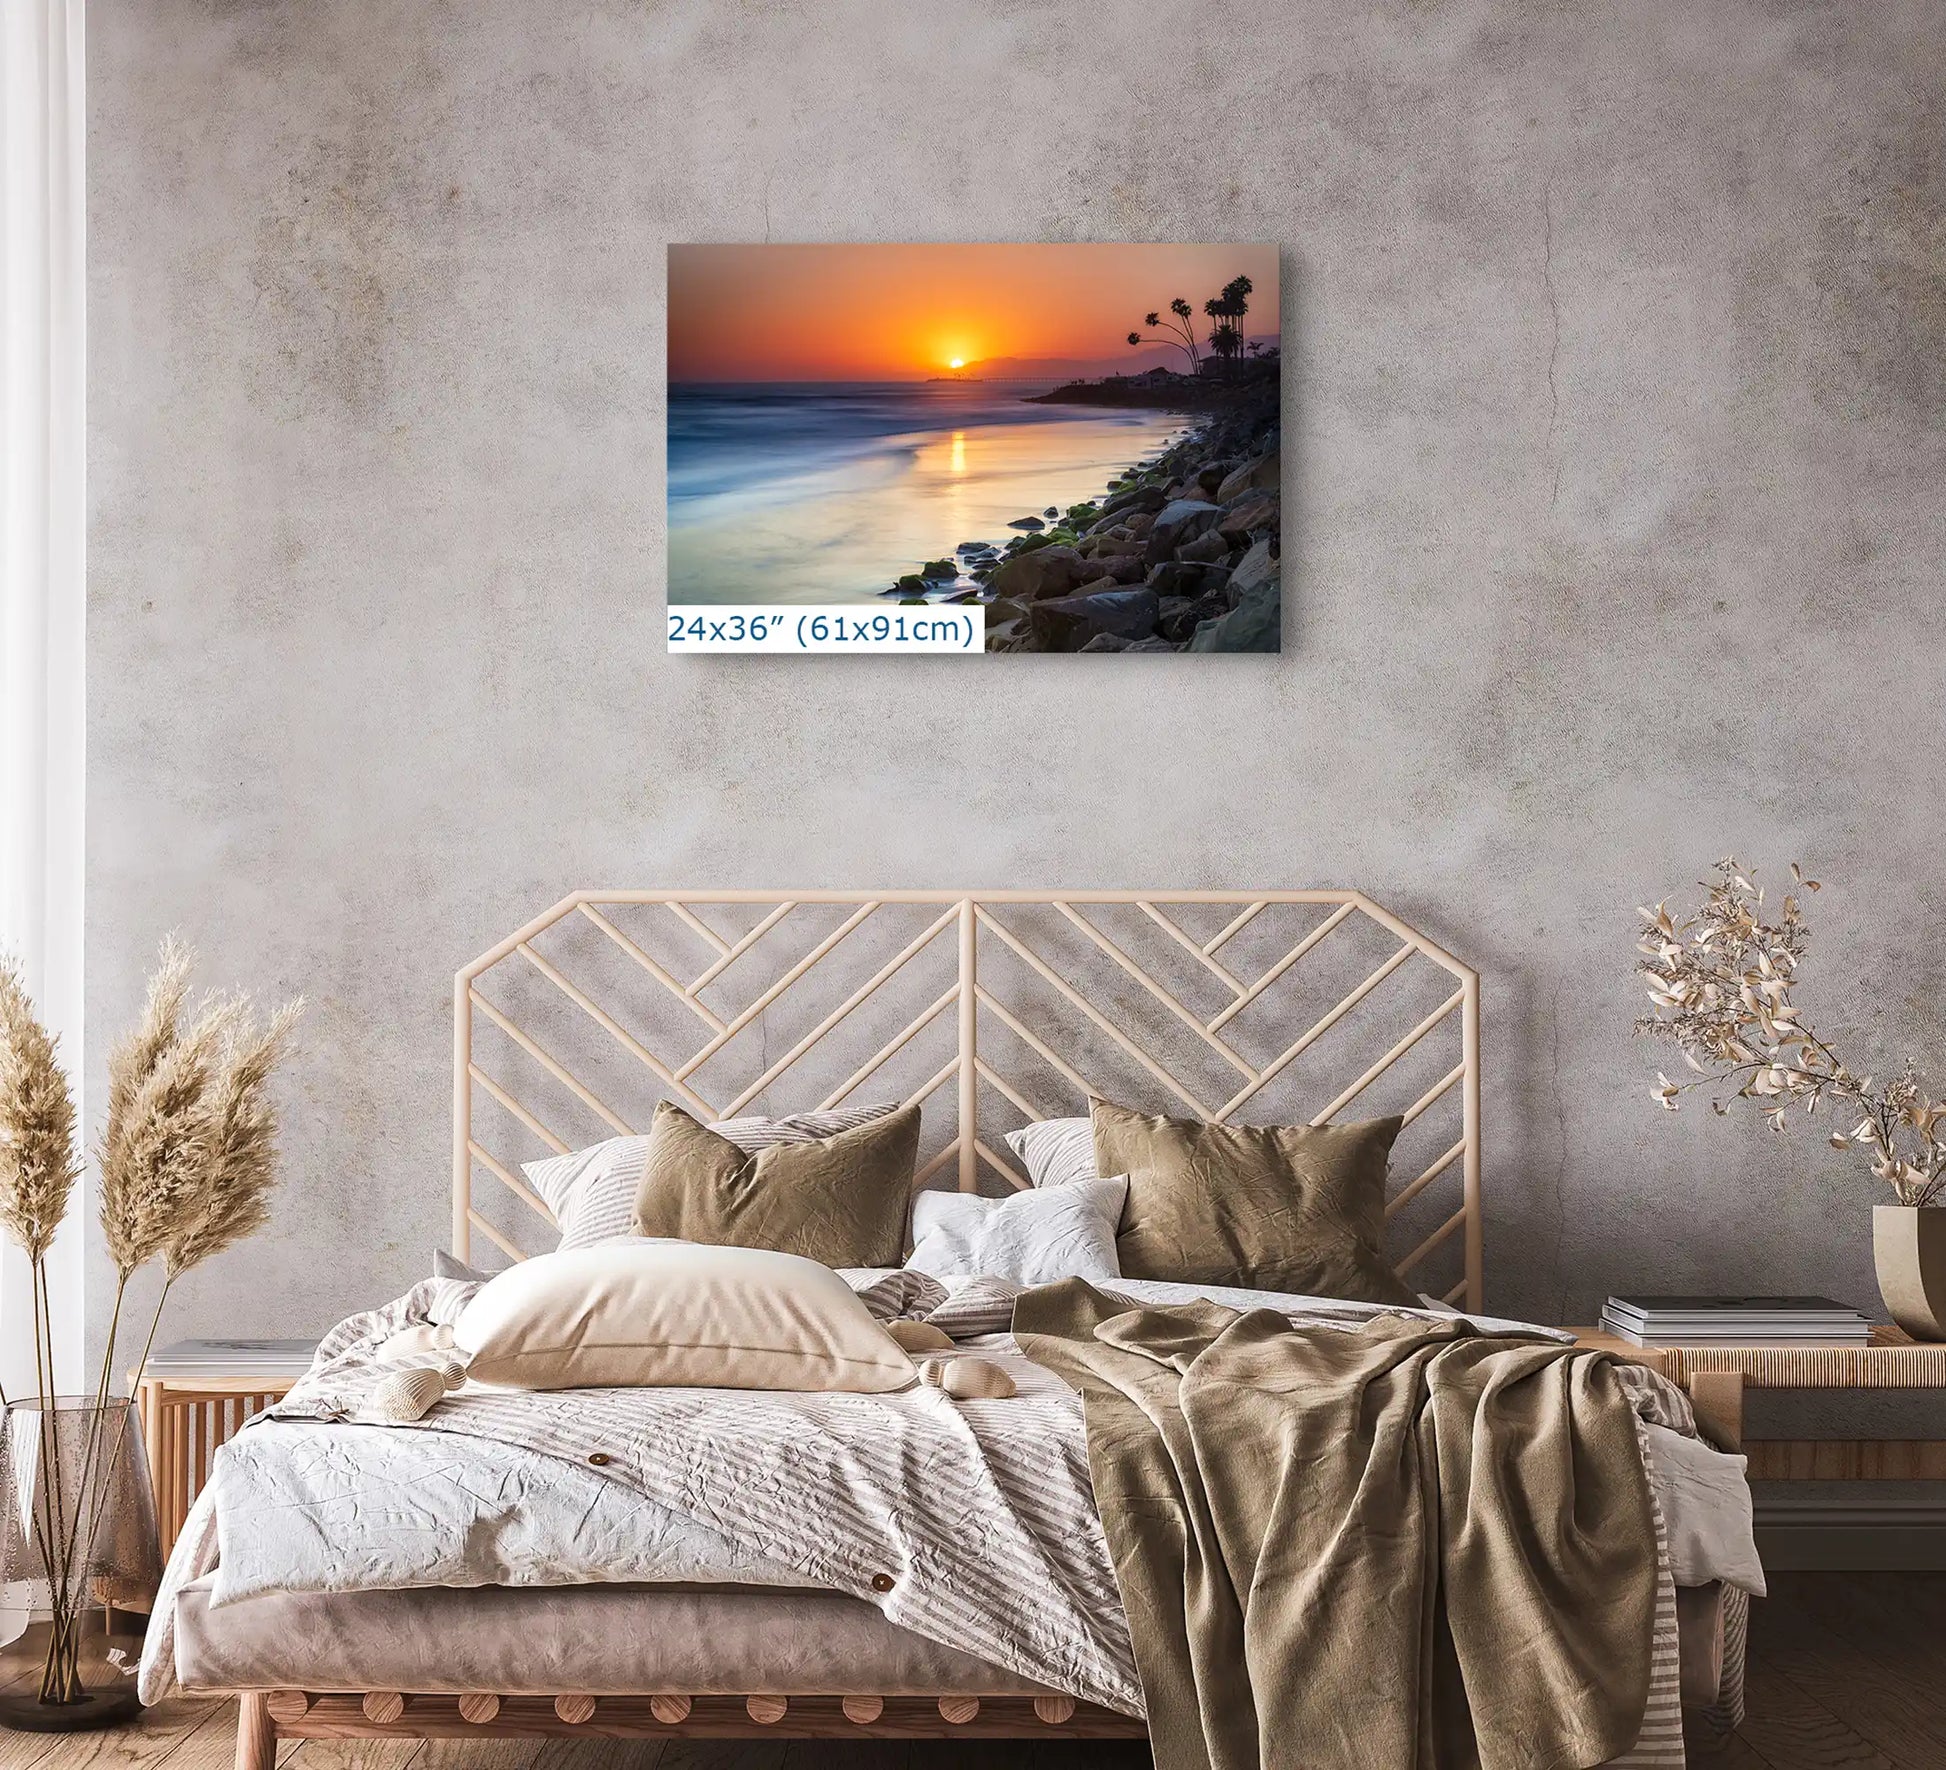 A 24"x36" canvas print of Ventura Beach sunset above a bed, transforming the bedroom into a peaceful retreat.